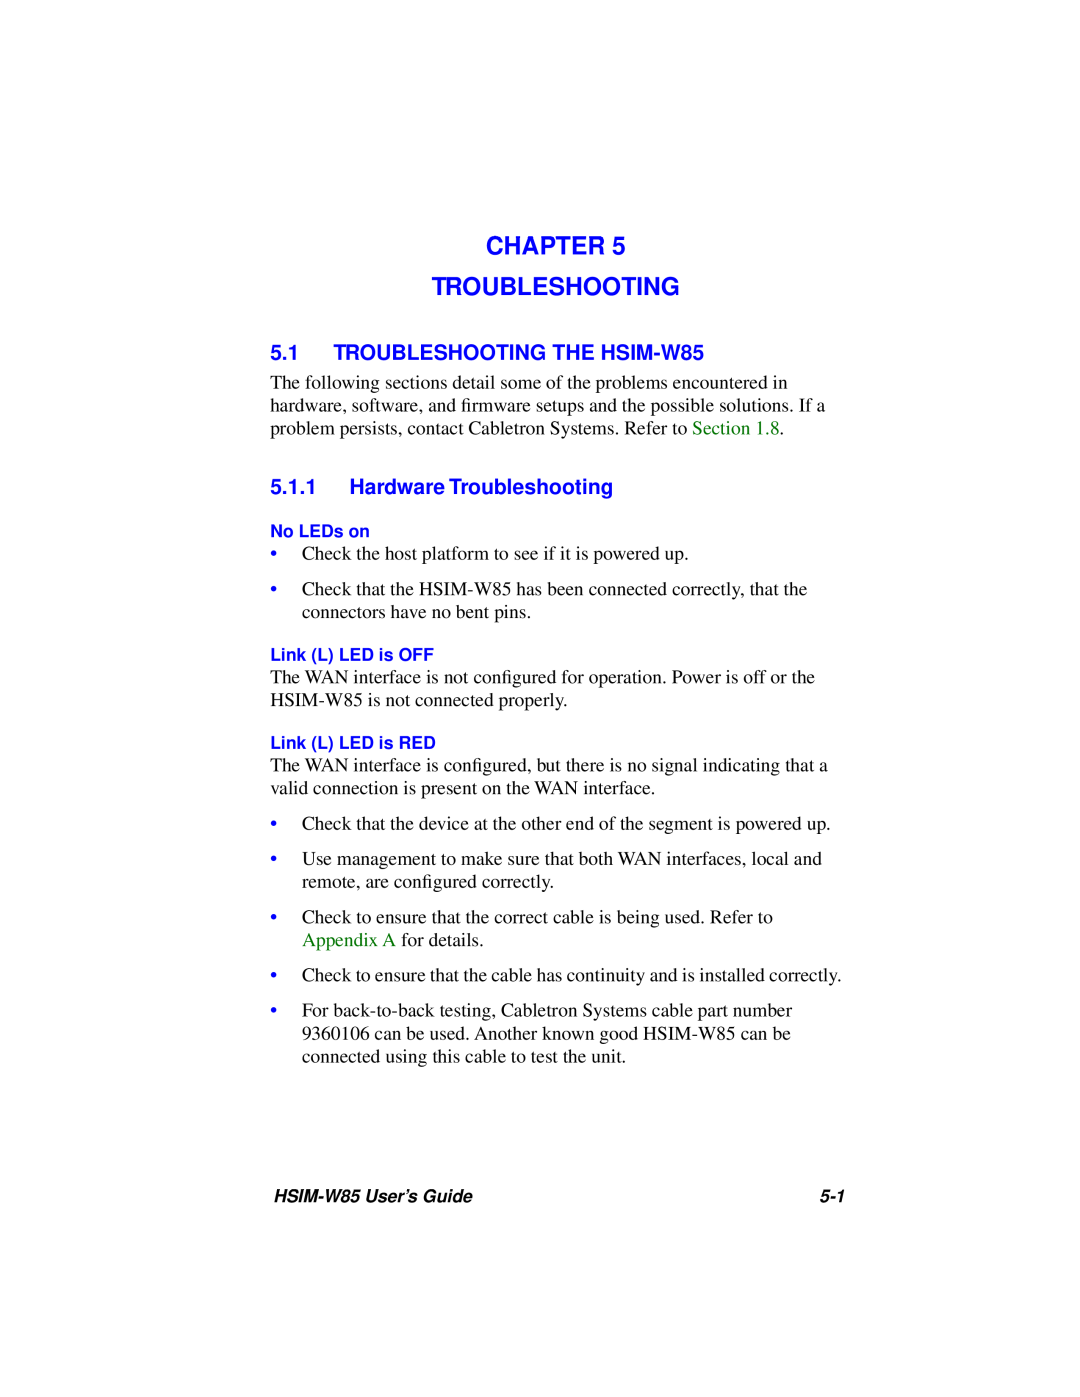 Cabletron Systems manual Chapter Troubleshooting, TROUBLESHOOTING THE HSIM-W85, Hardware Troubleshooting 